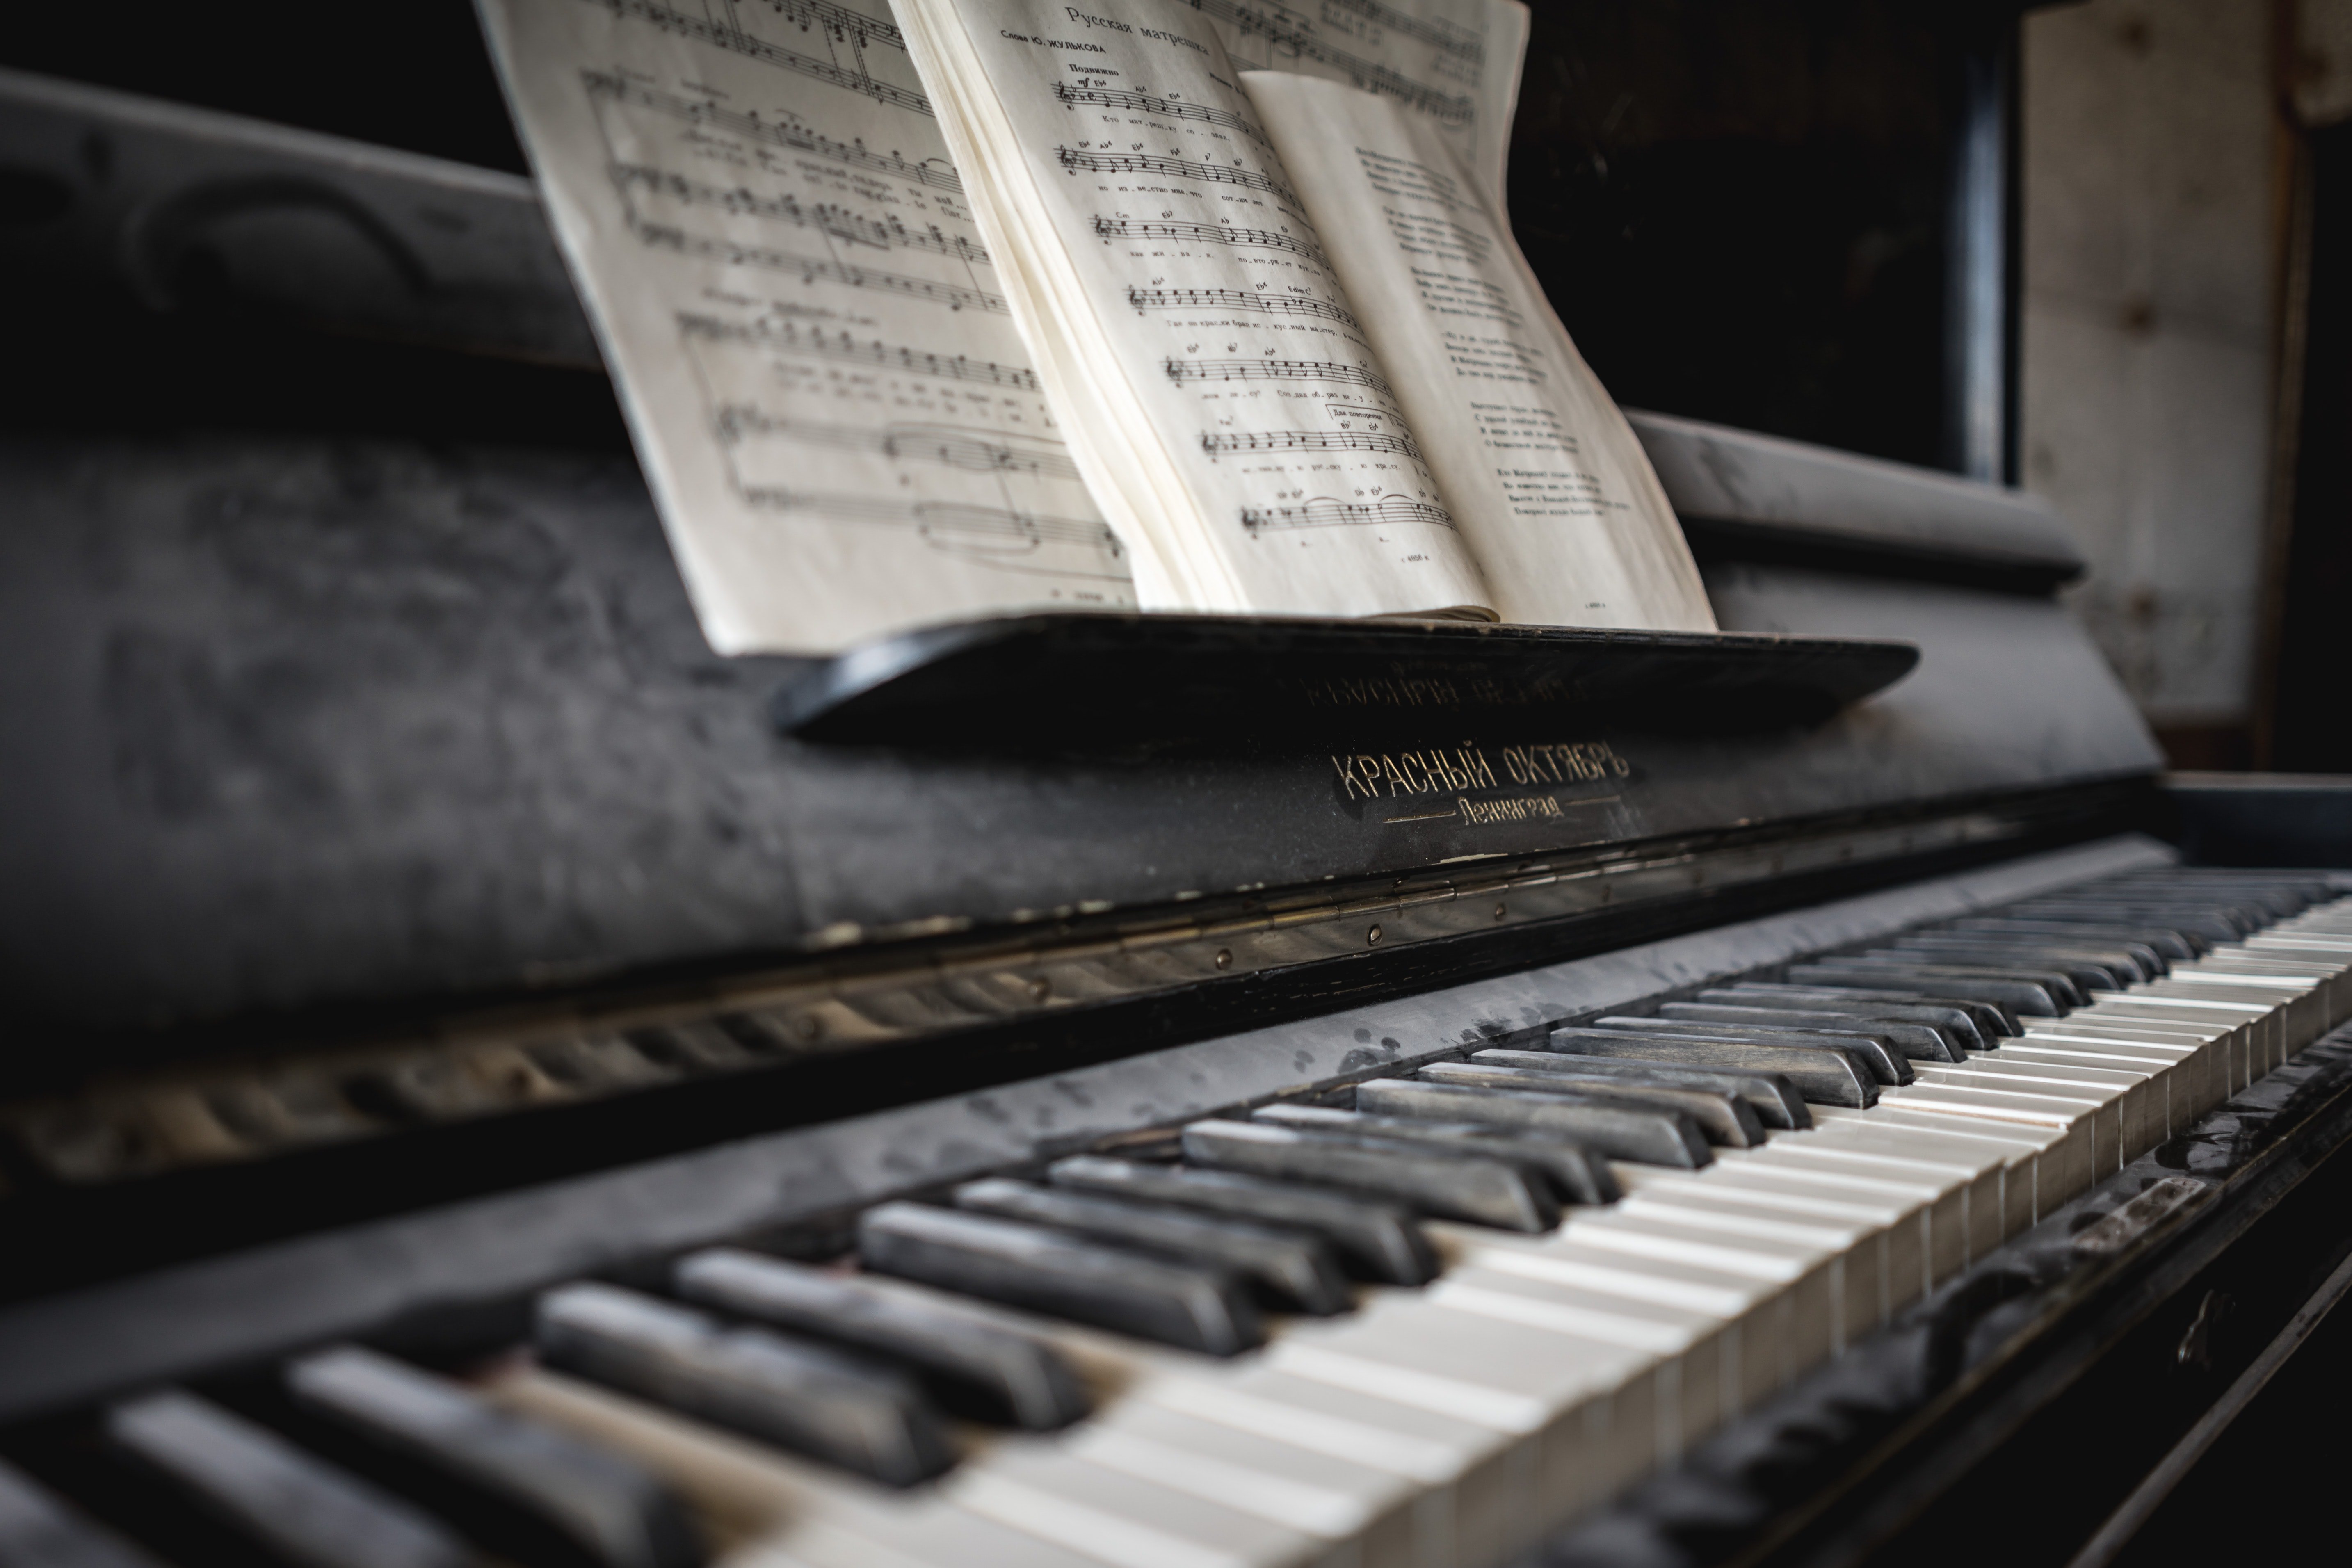 Mrs. Cooper was willing to give away the piano to Adele, but on a condition. | Source: Unsplash